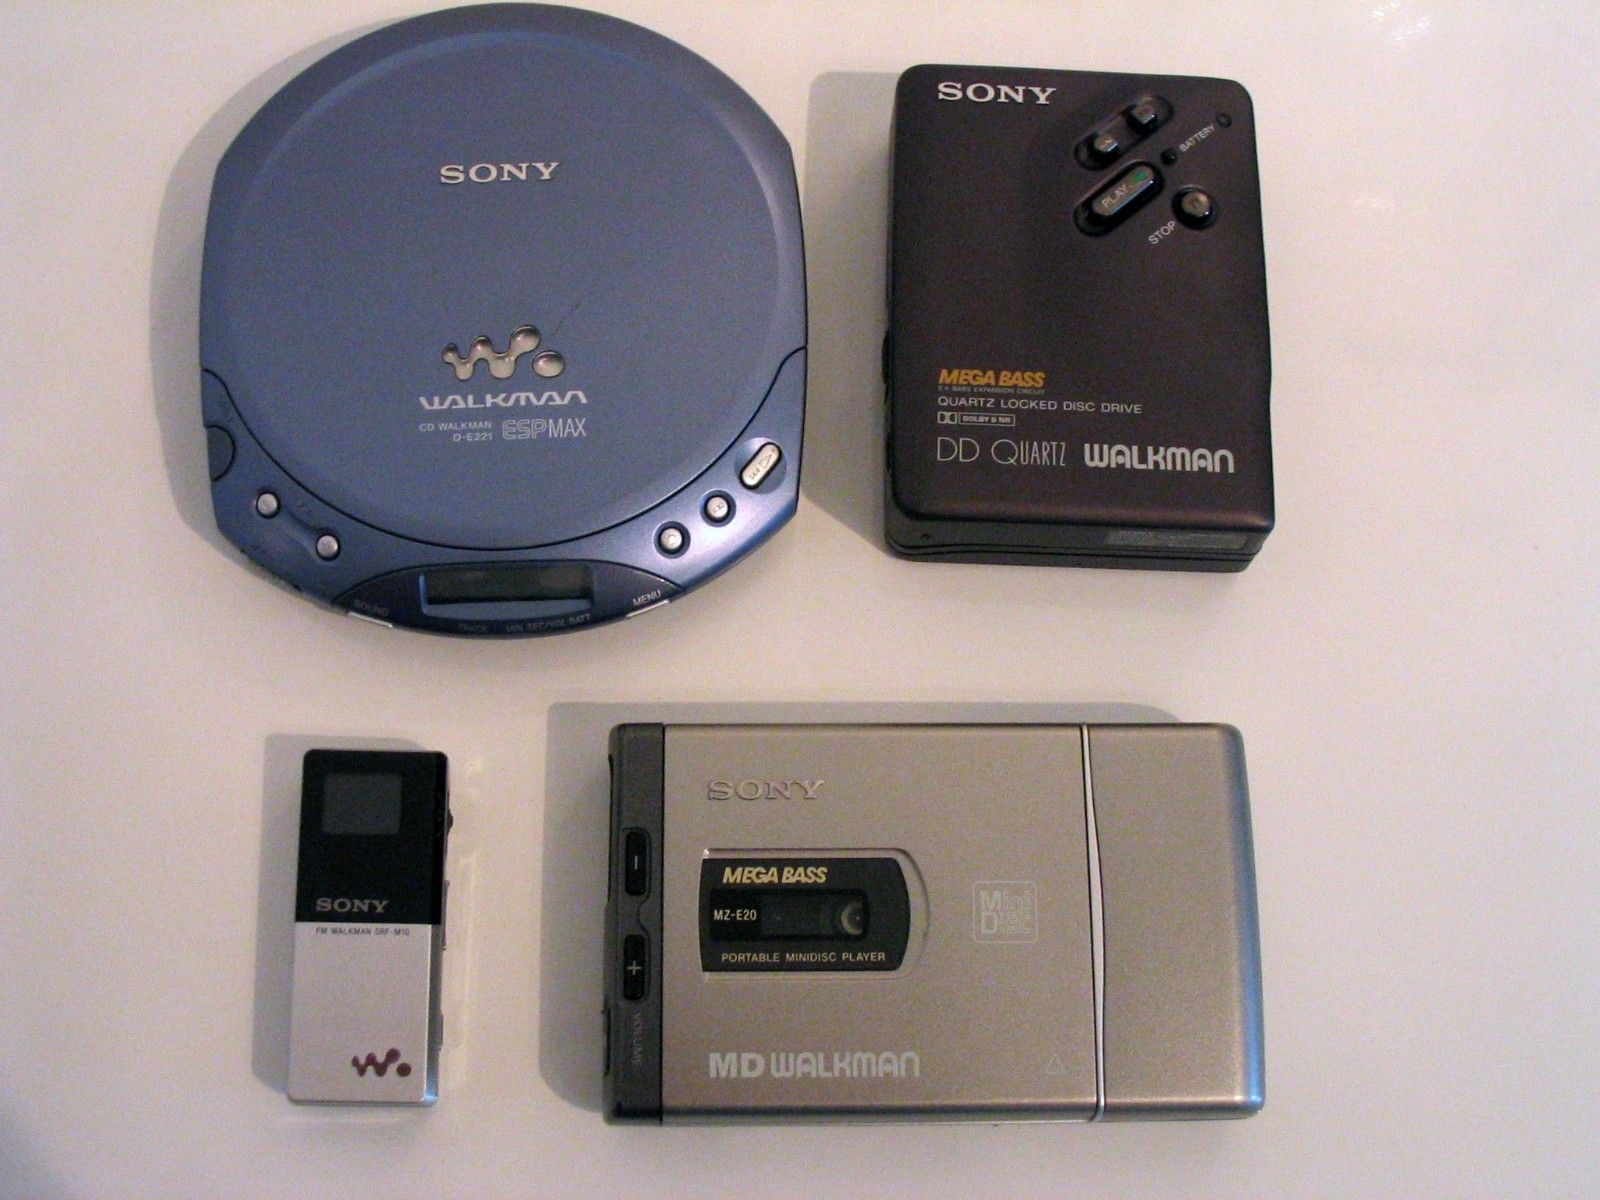 Iconic Gadgets Of The 90s Amazing Gadgets And Gizmos From Yesteryear image 4